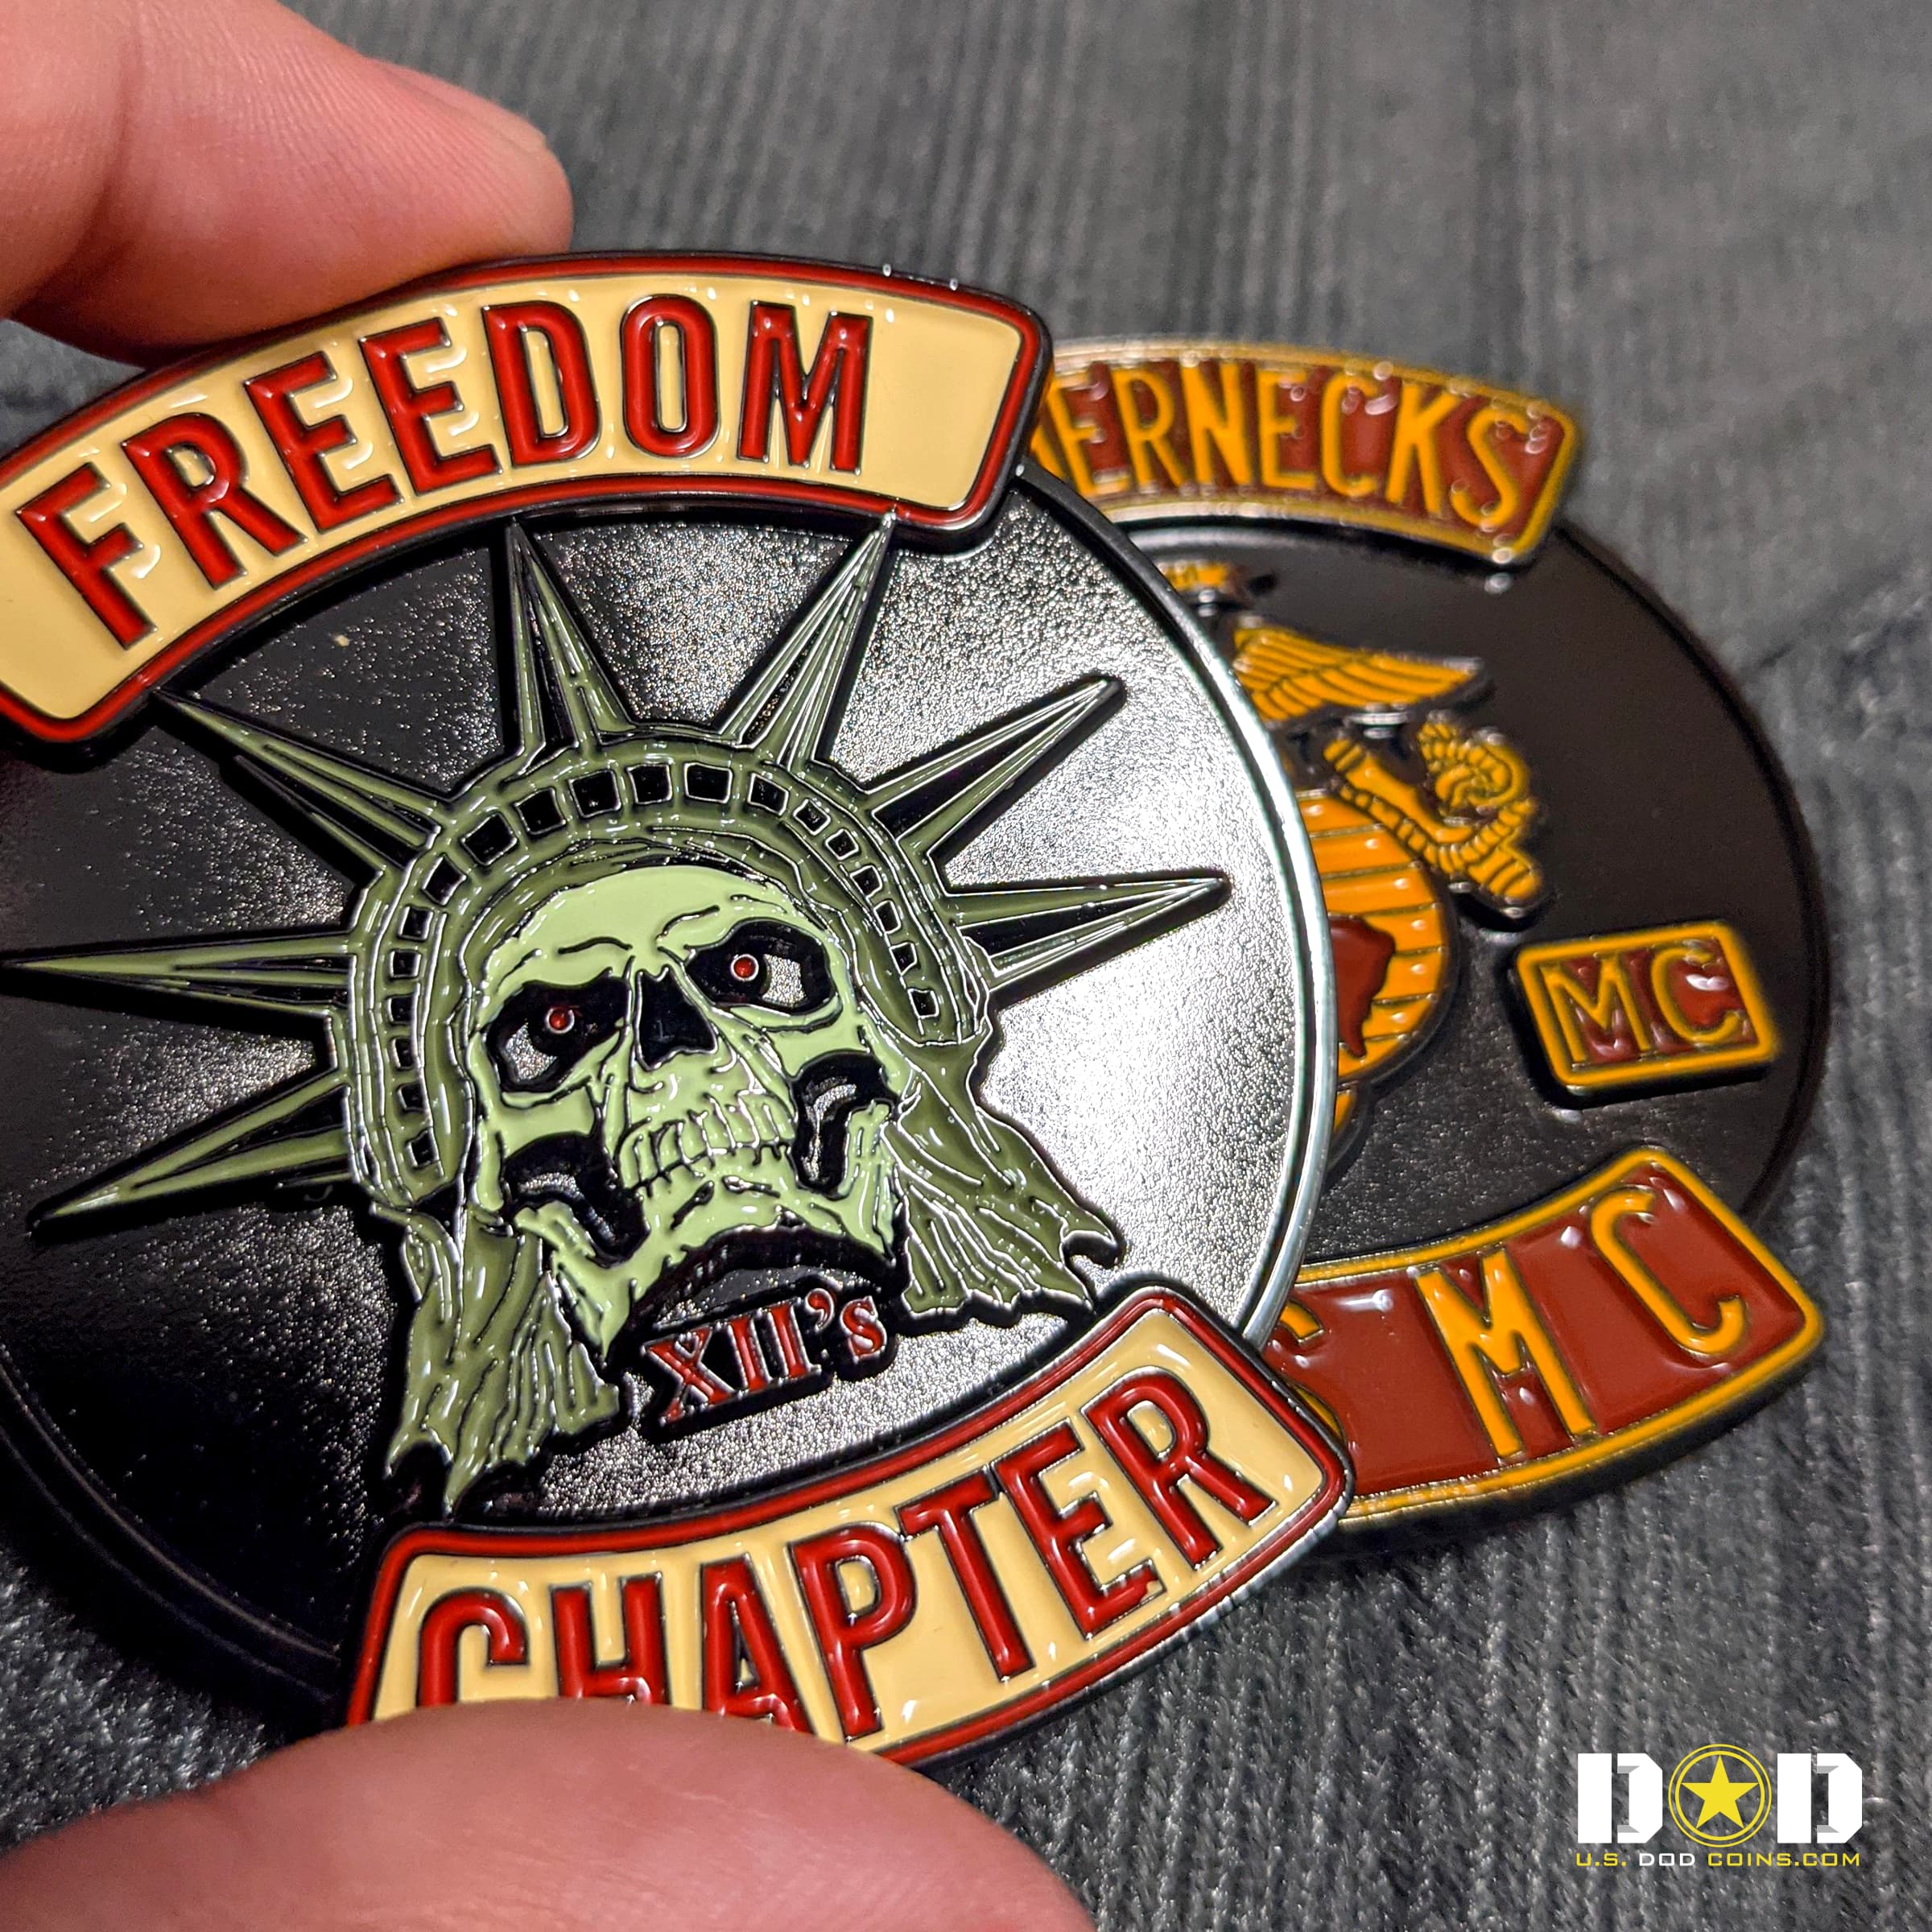 Freedom-Chapter-Liberty-Challenge-Coin_0000_PXL_20220502_205835998